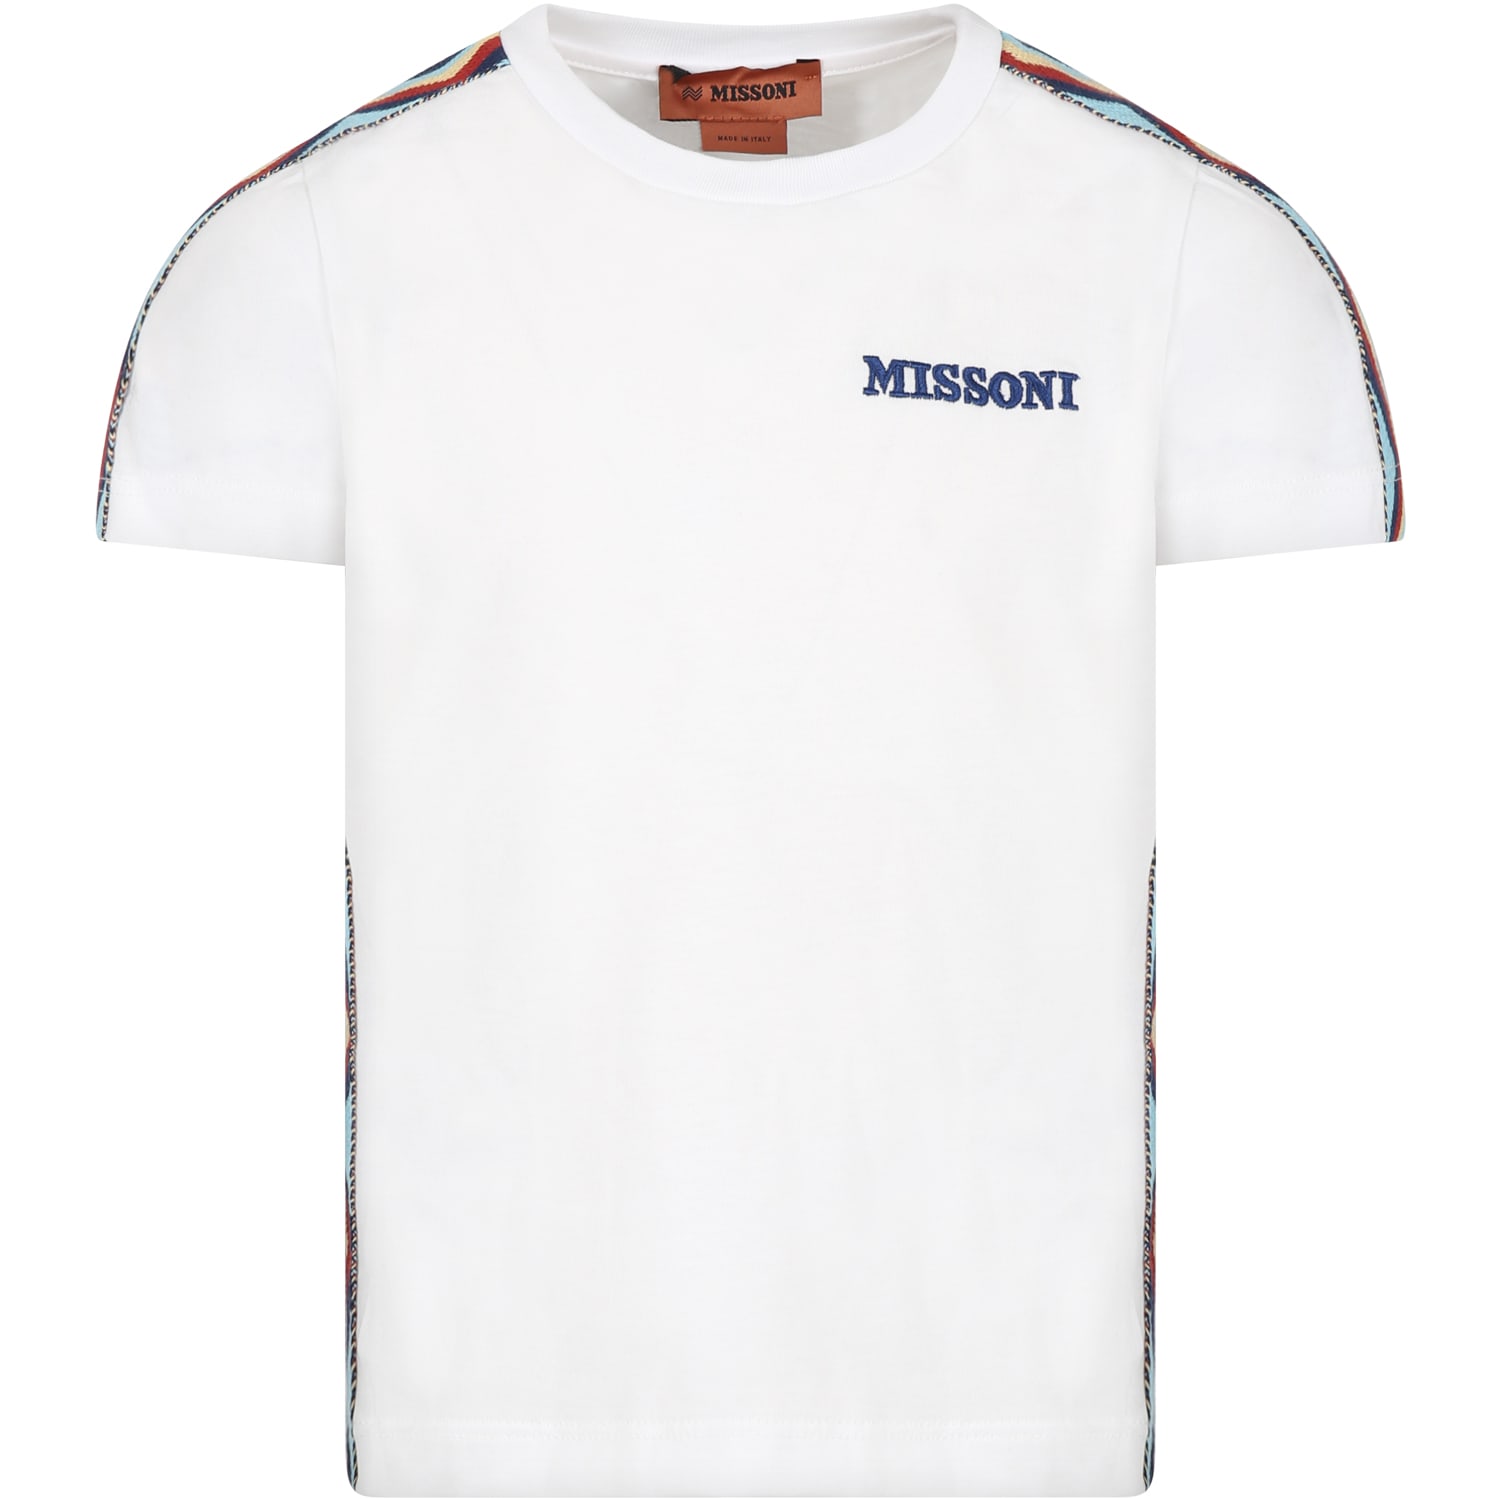 MISSONI WHITE T-SHIRT FOR KIDS WITH LOGO AND ICONIC CHEVRON MOTIF